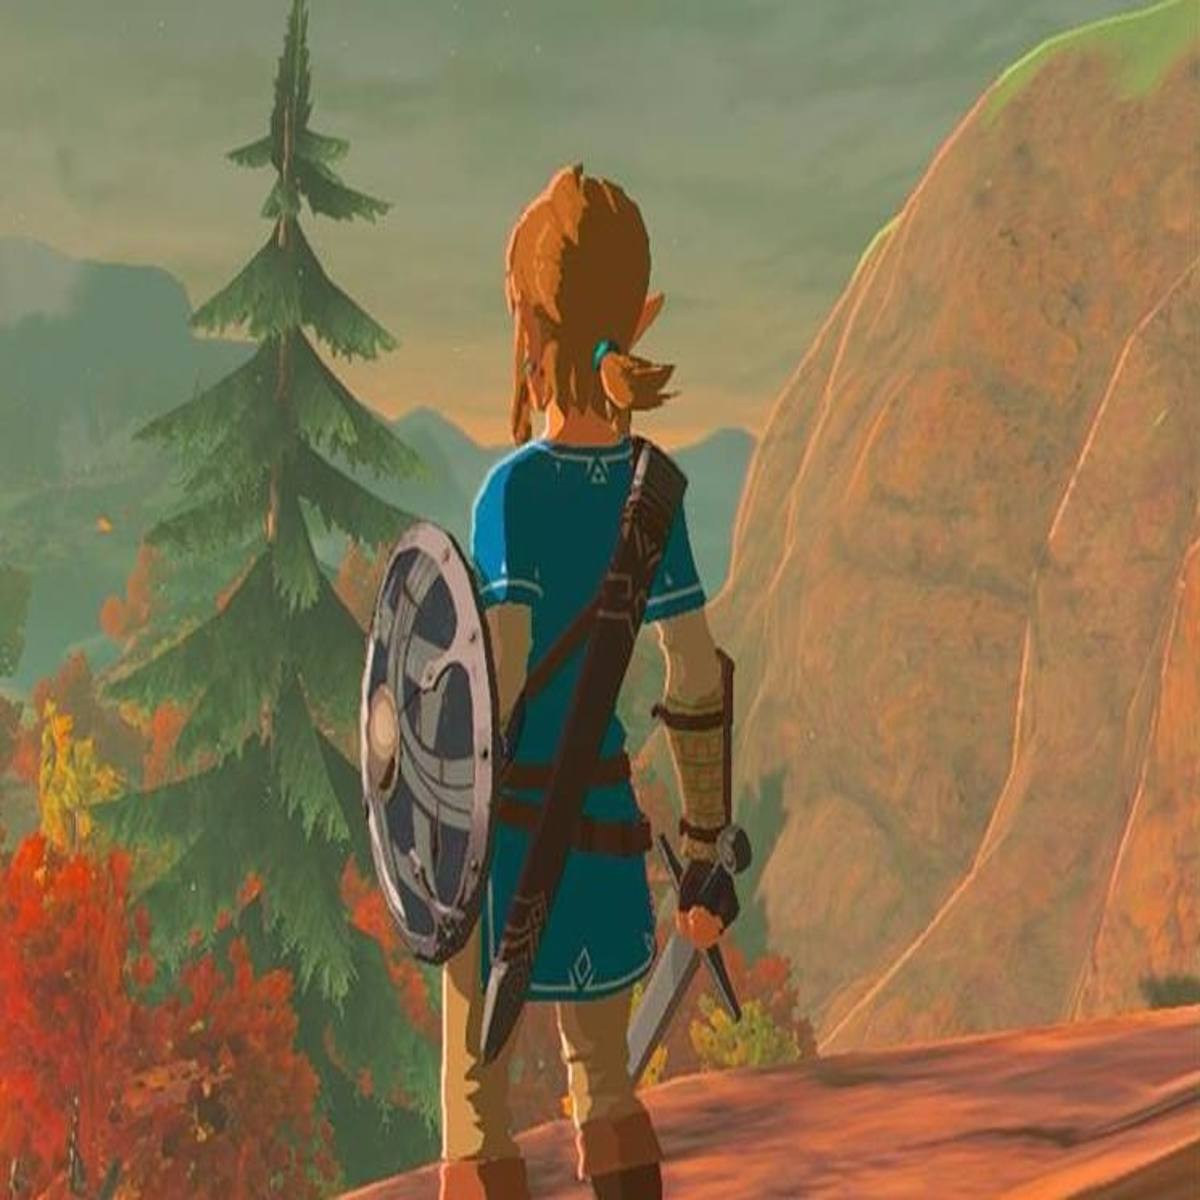 Breath of the Wild Wii U ROM: Is It Safe And Legal To Download On Your PC?